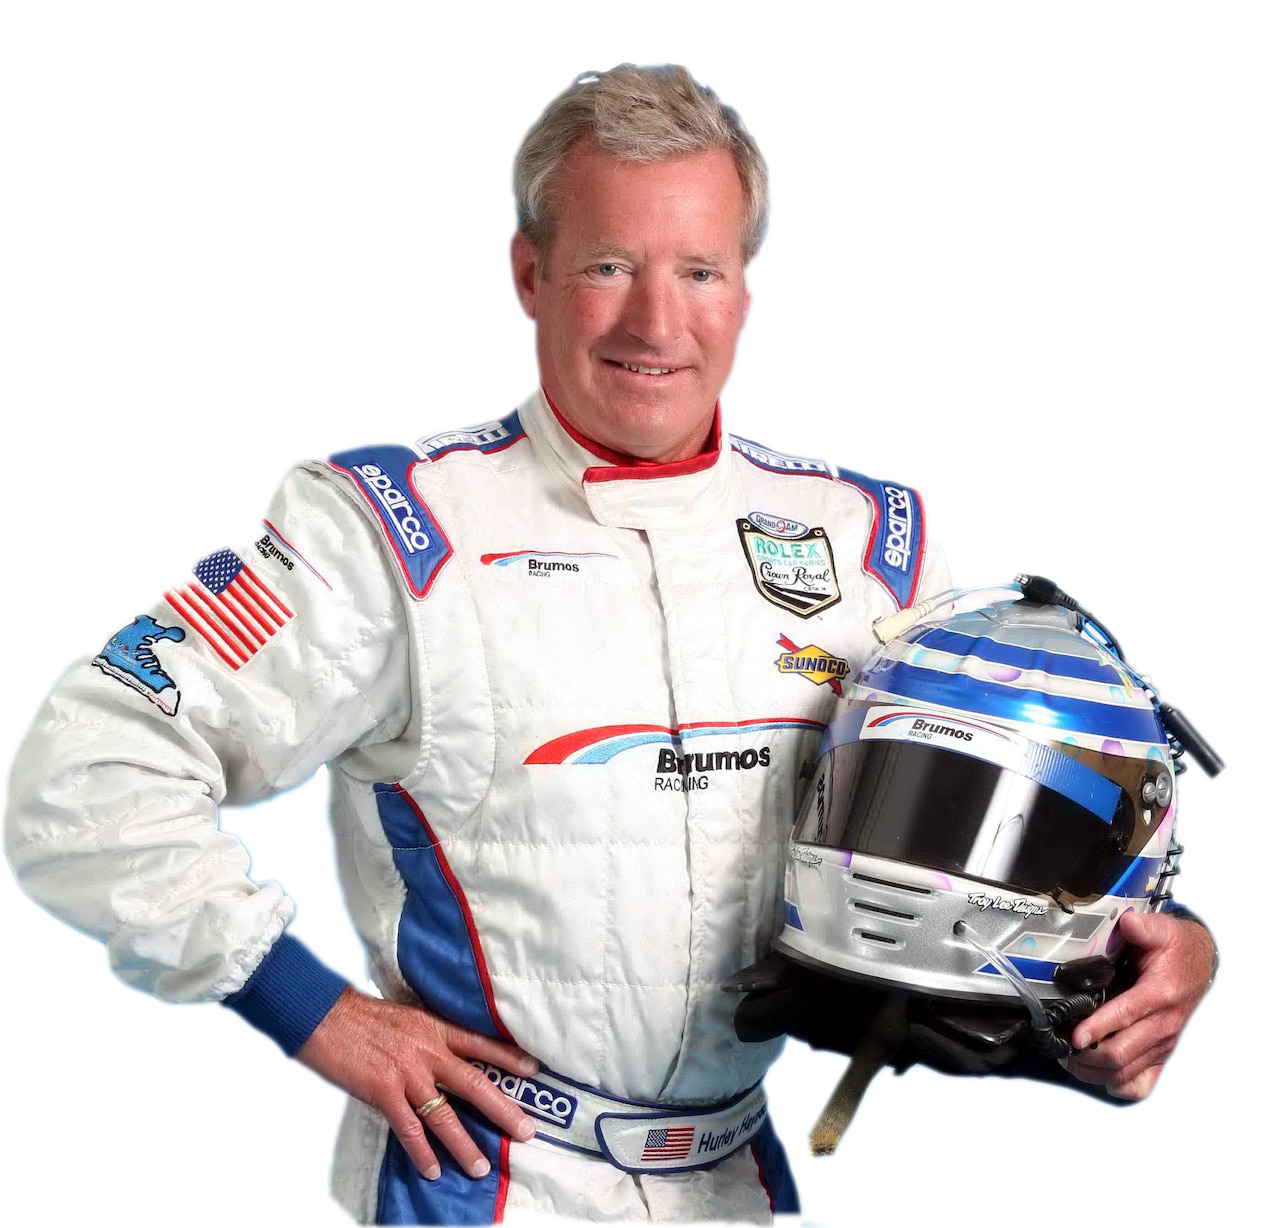 A race car driver poses for a picture in his racing suit, holding a racing helmet.